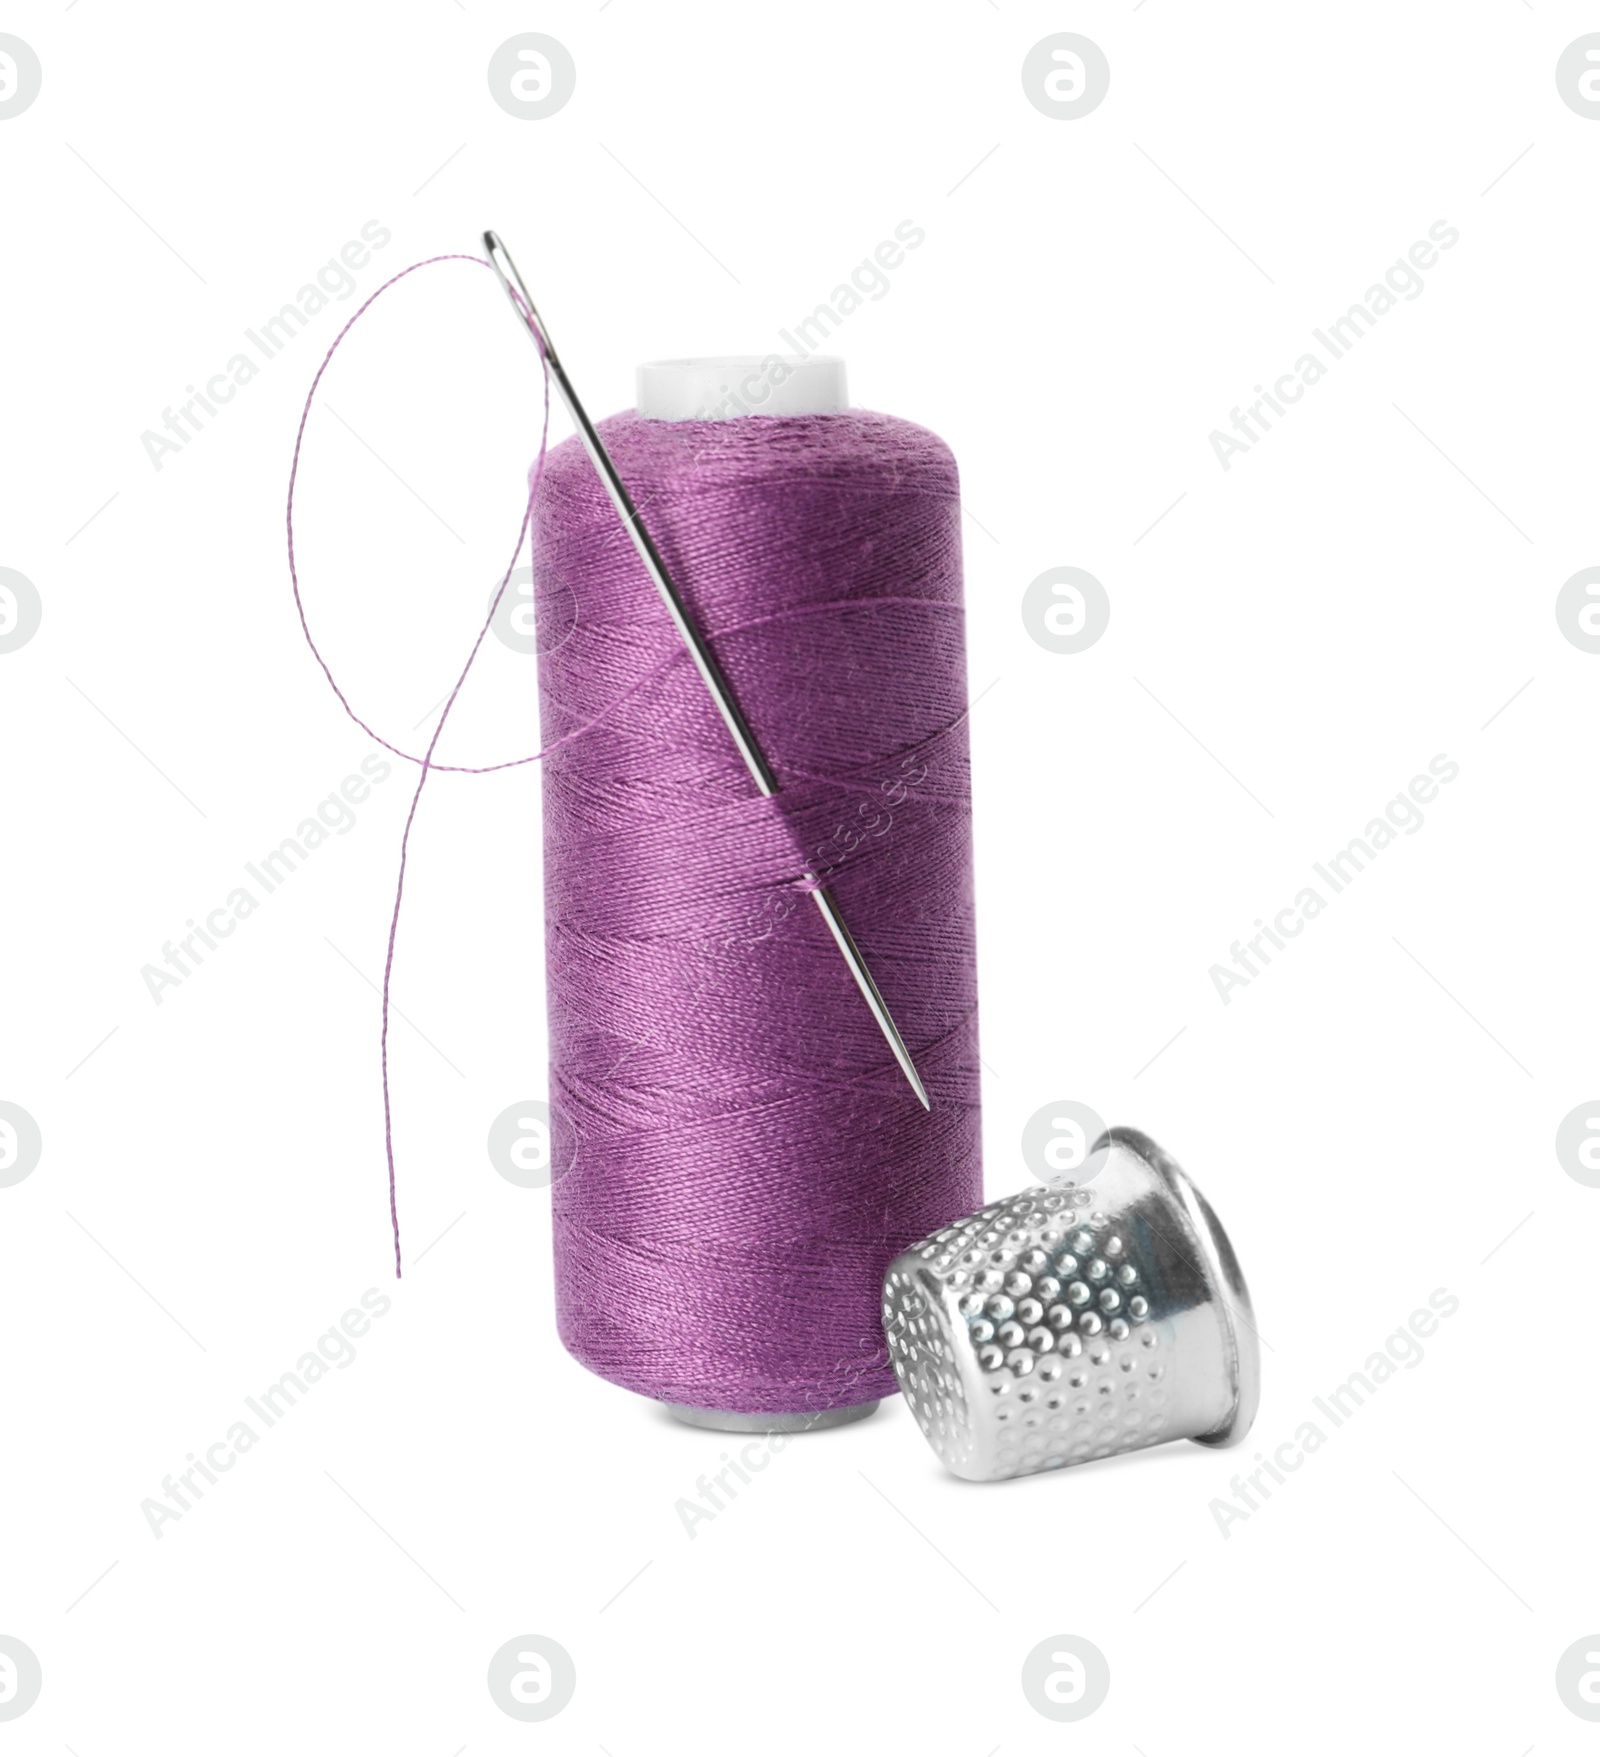 Photo of Spool of thread and sewing tools on white background